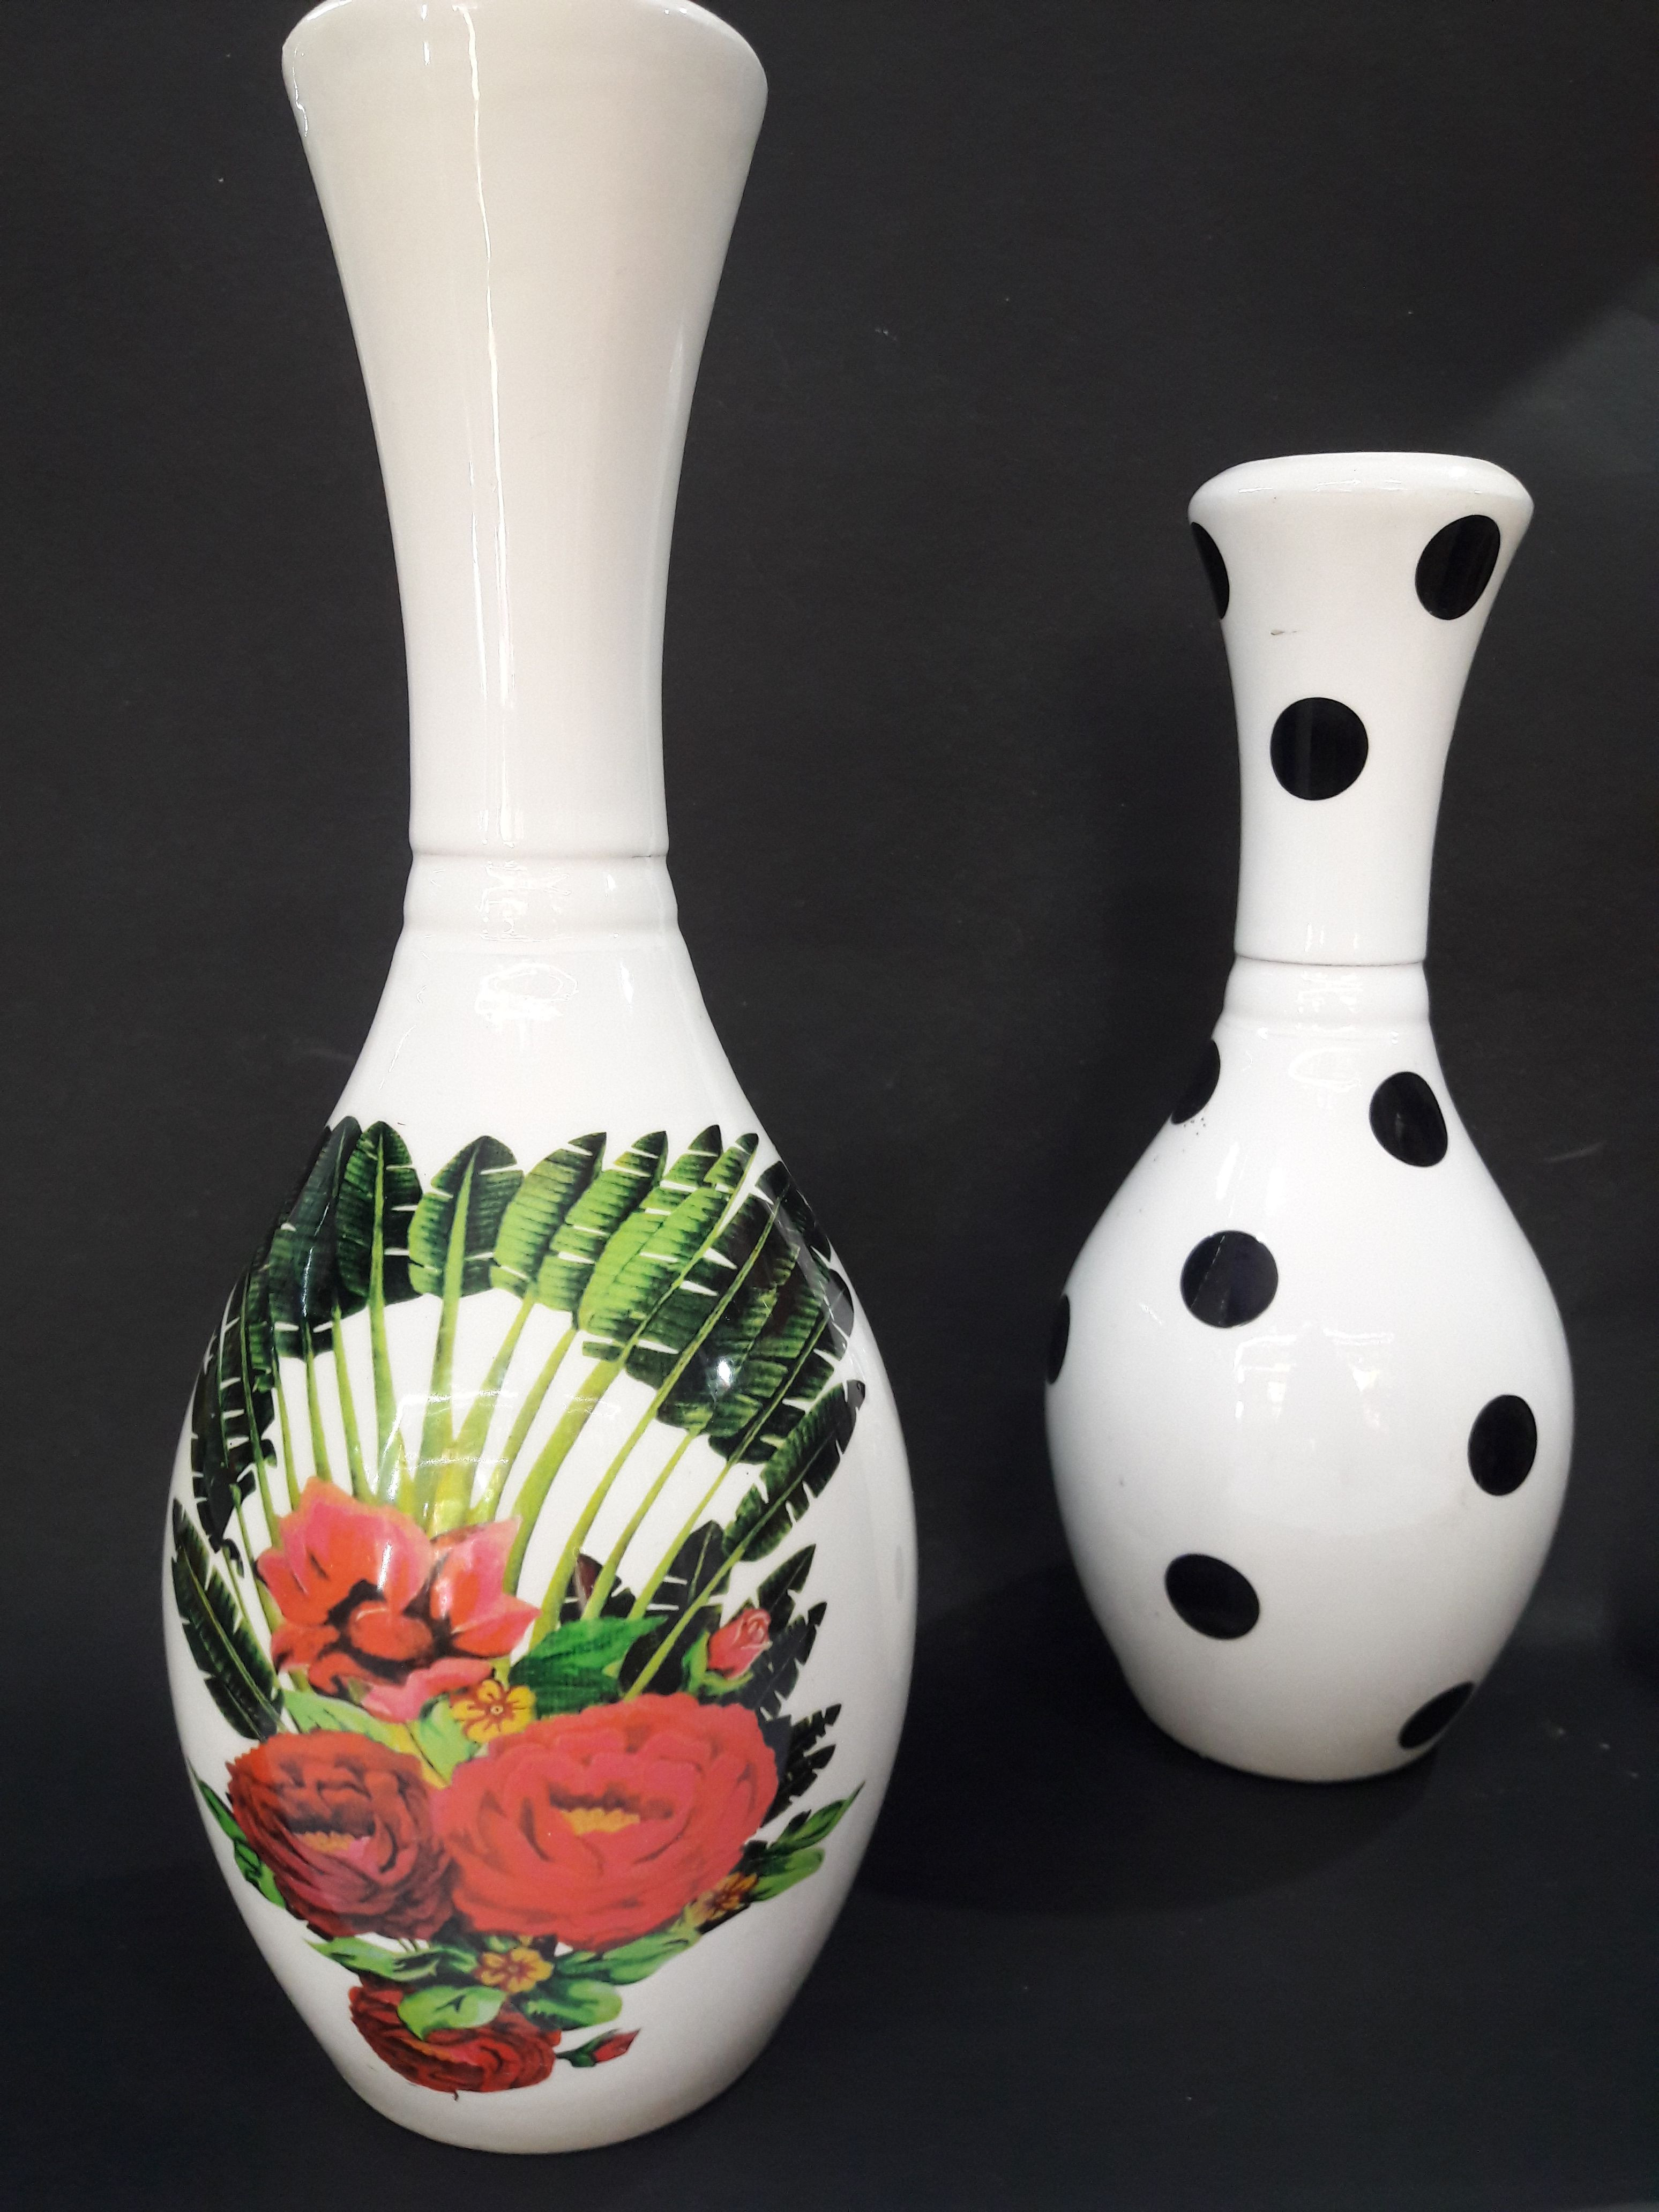 12 Popular Home Goods Flower Vases 2024 free download home goods flower vases of best home decor collectionsdc29fc291c288 best assured quality product with best home decor collectionsdc29fc291c288 best assured quality productac299c2a7 flo